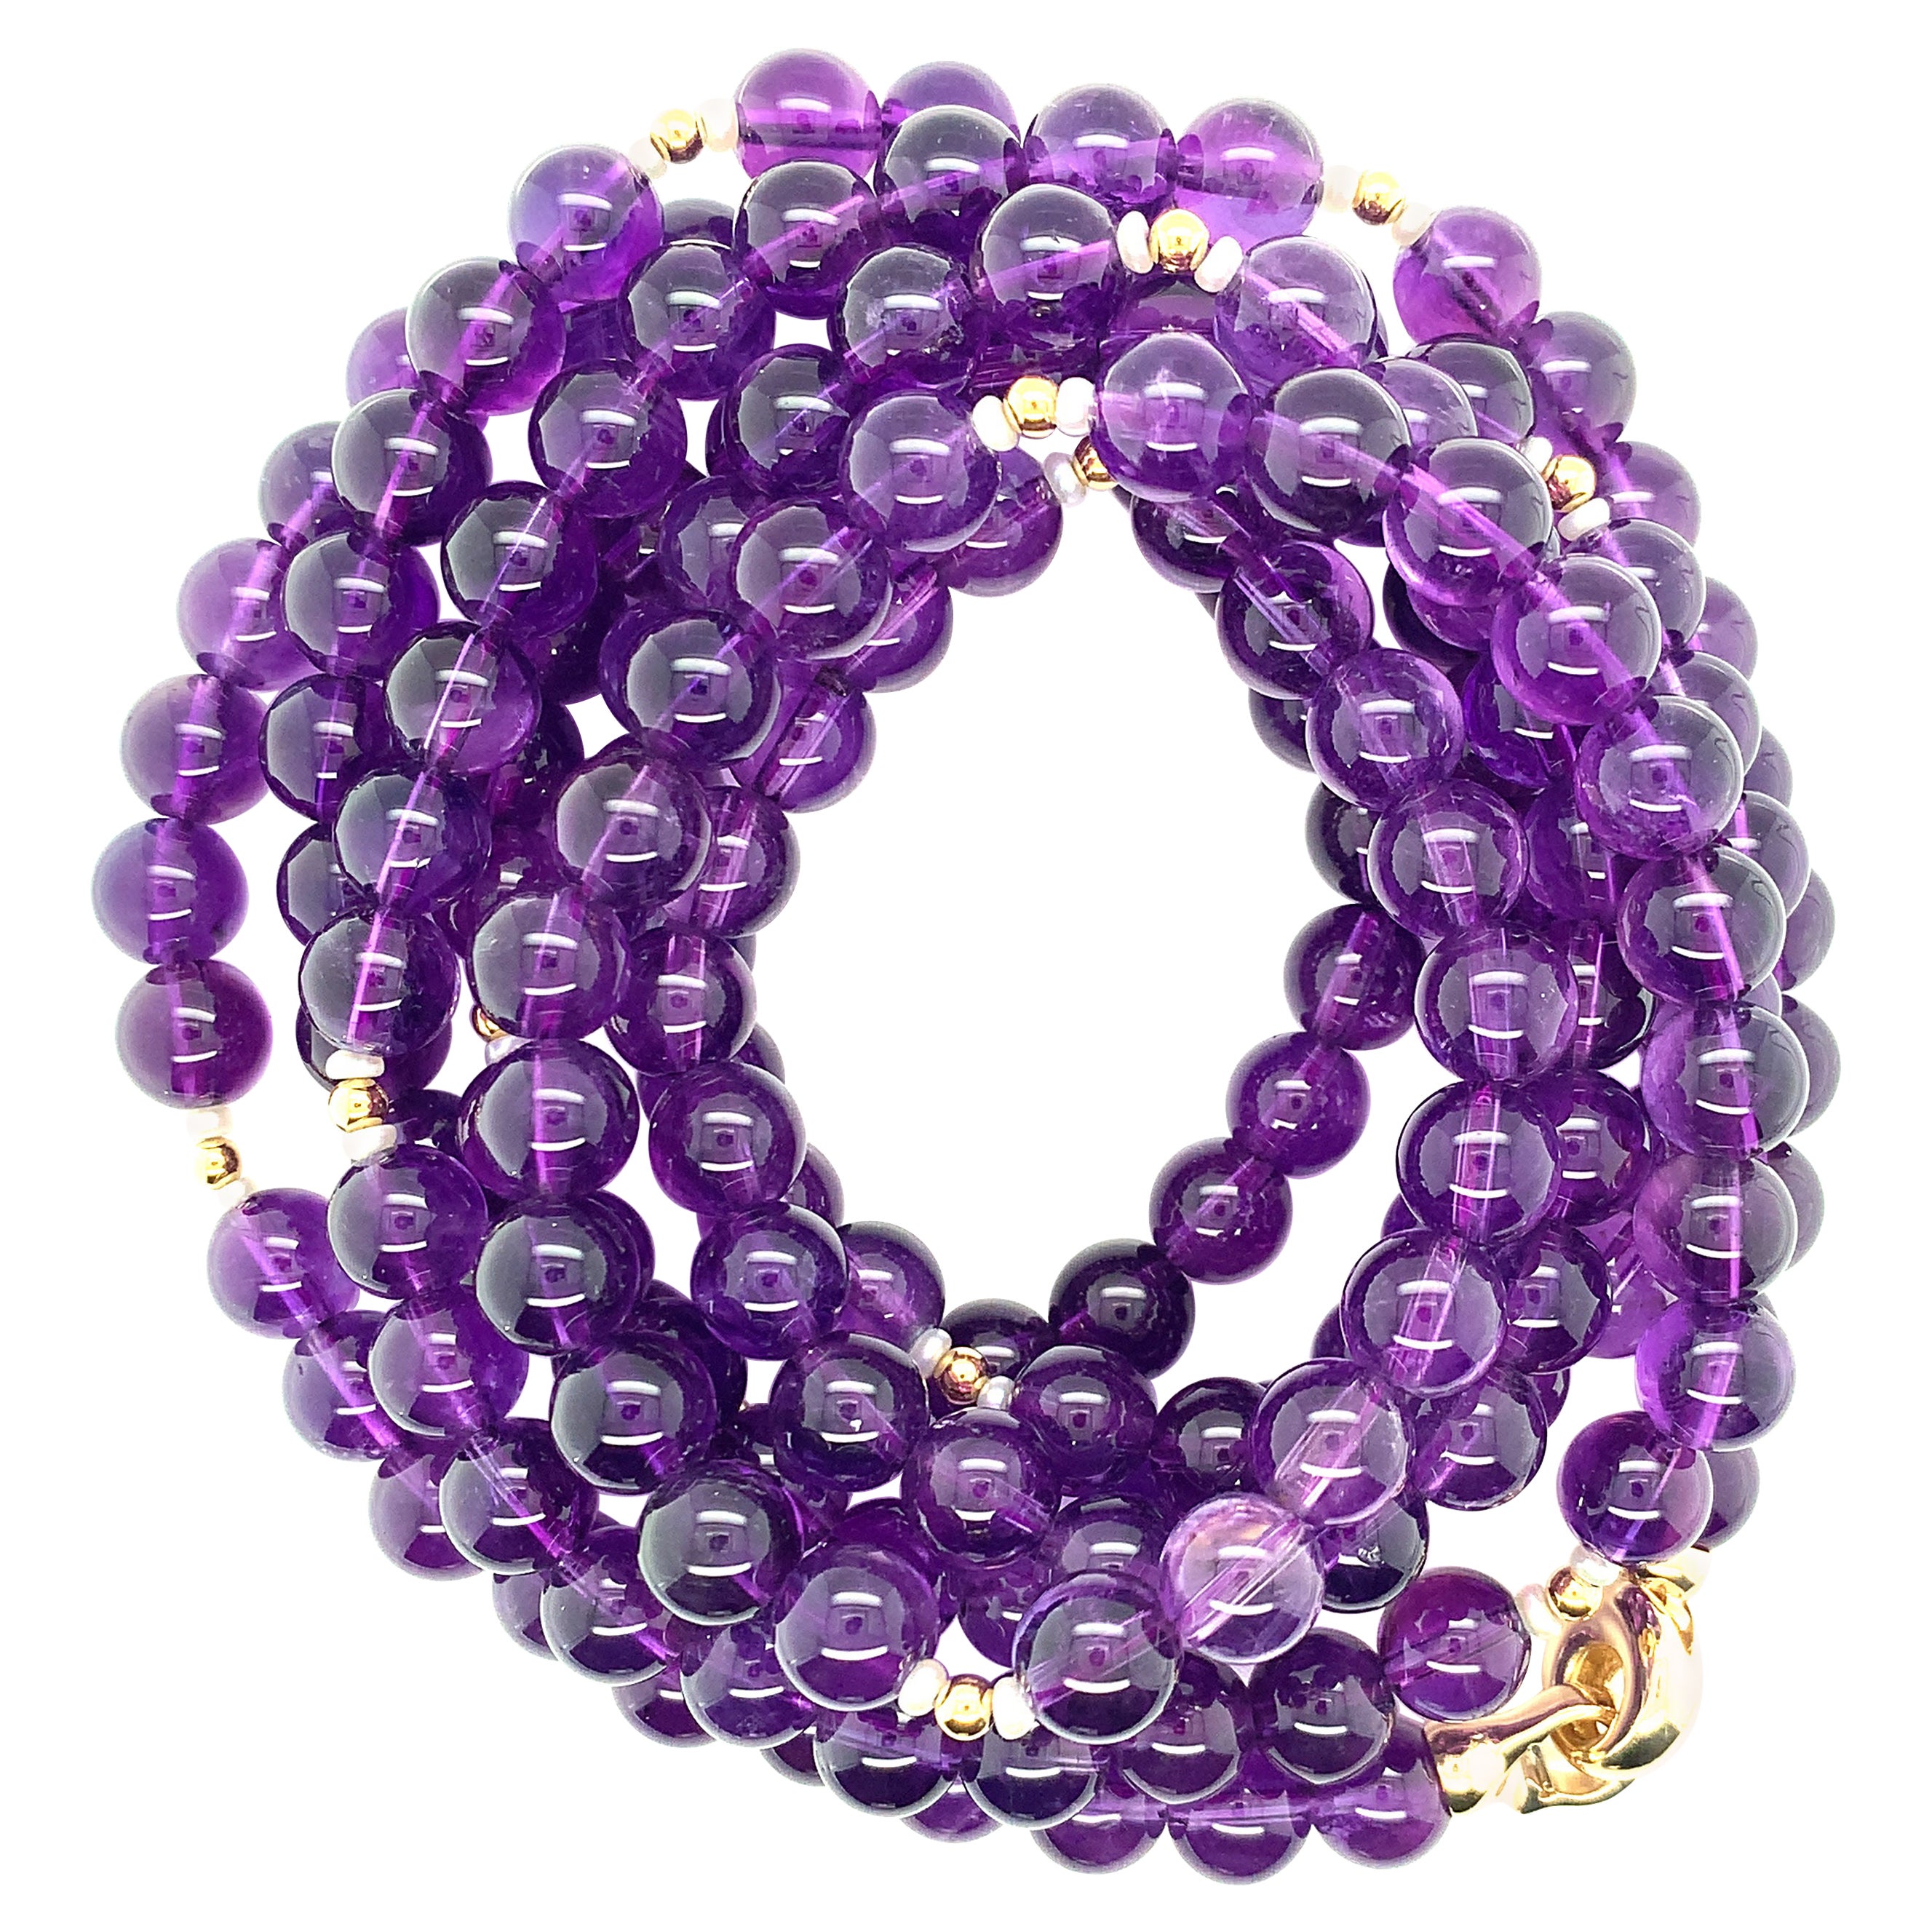 This versatile strand of richly colored amethyst beads can be worn in several different ways! Fine quality 8.00mm round amethyst beads have been strung with 18k yellow gold spacers and tiny accent pearls in an elegant necklace that measures 51